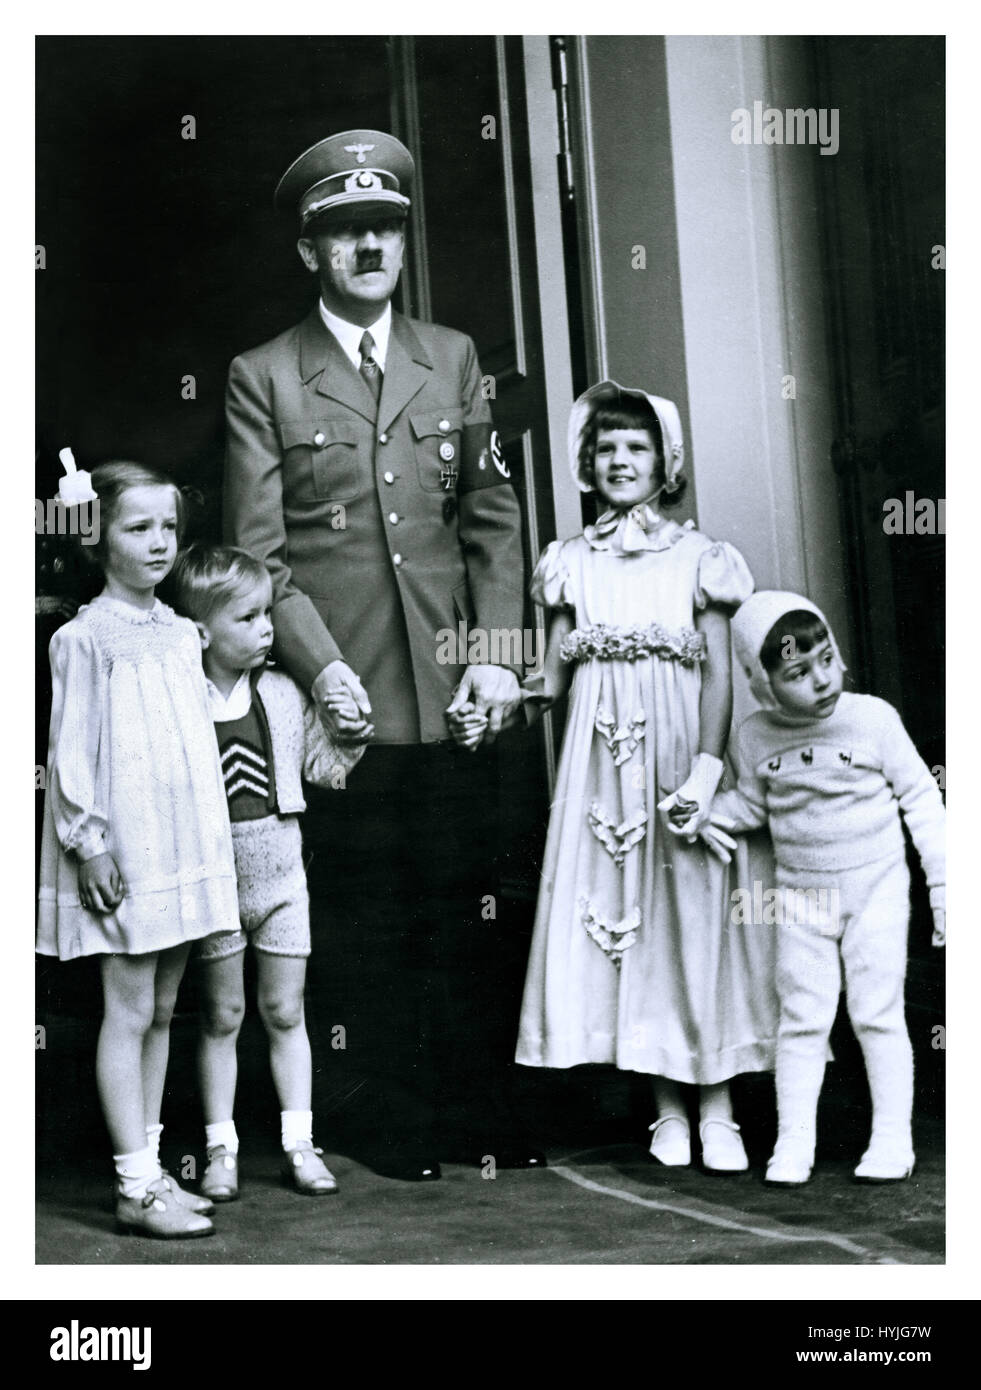 Adolf Hitler in uniform with swastika armband posing outside his alpine chalet in Berchtesgaden on his 50th birthday with a group of children from high ranking Nazi officials April 20th 1939 Stock Photo